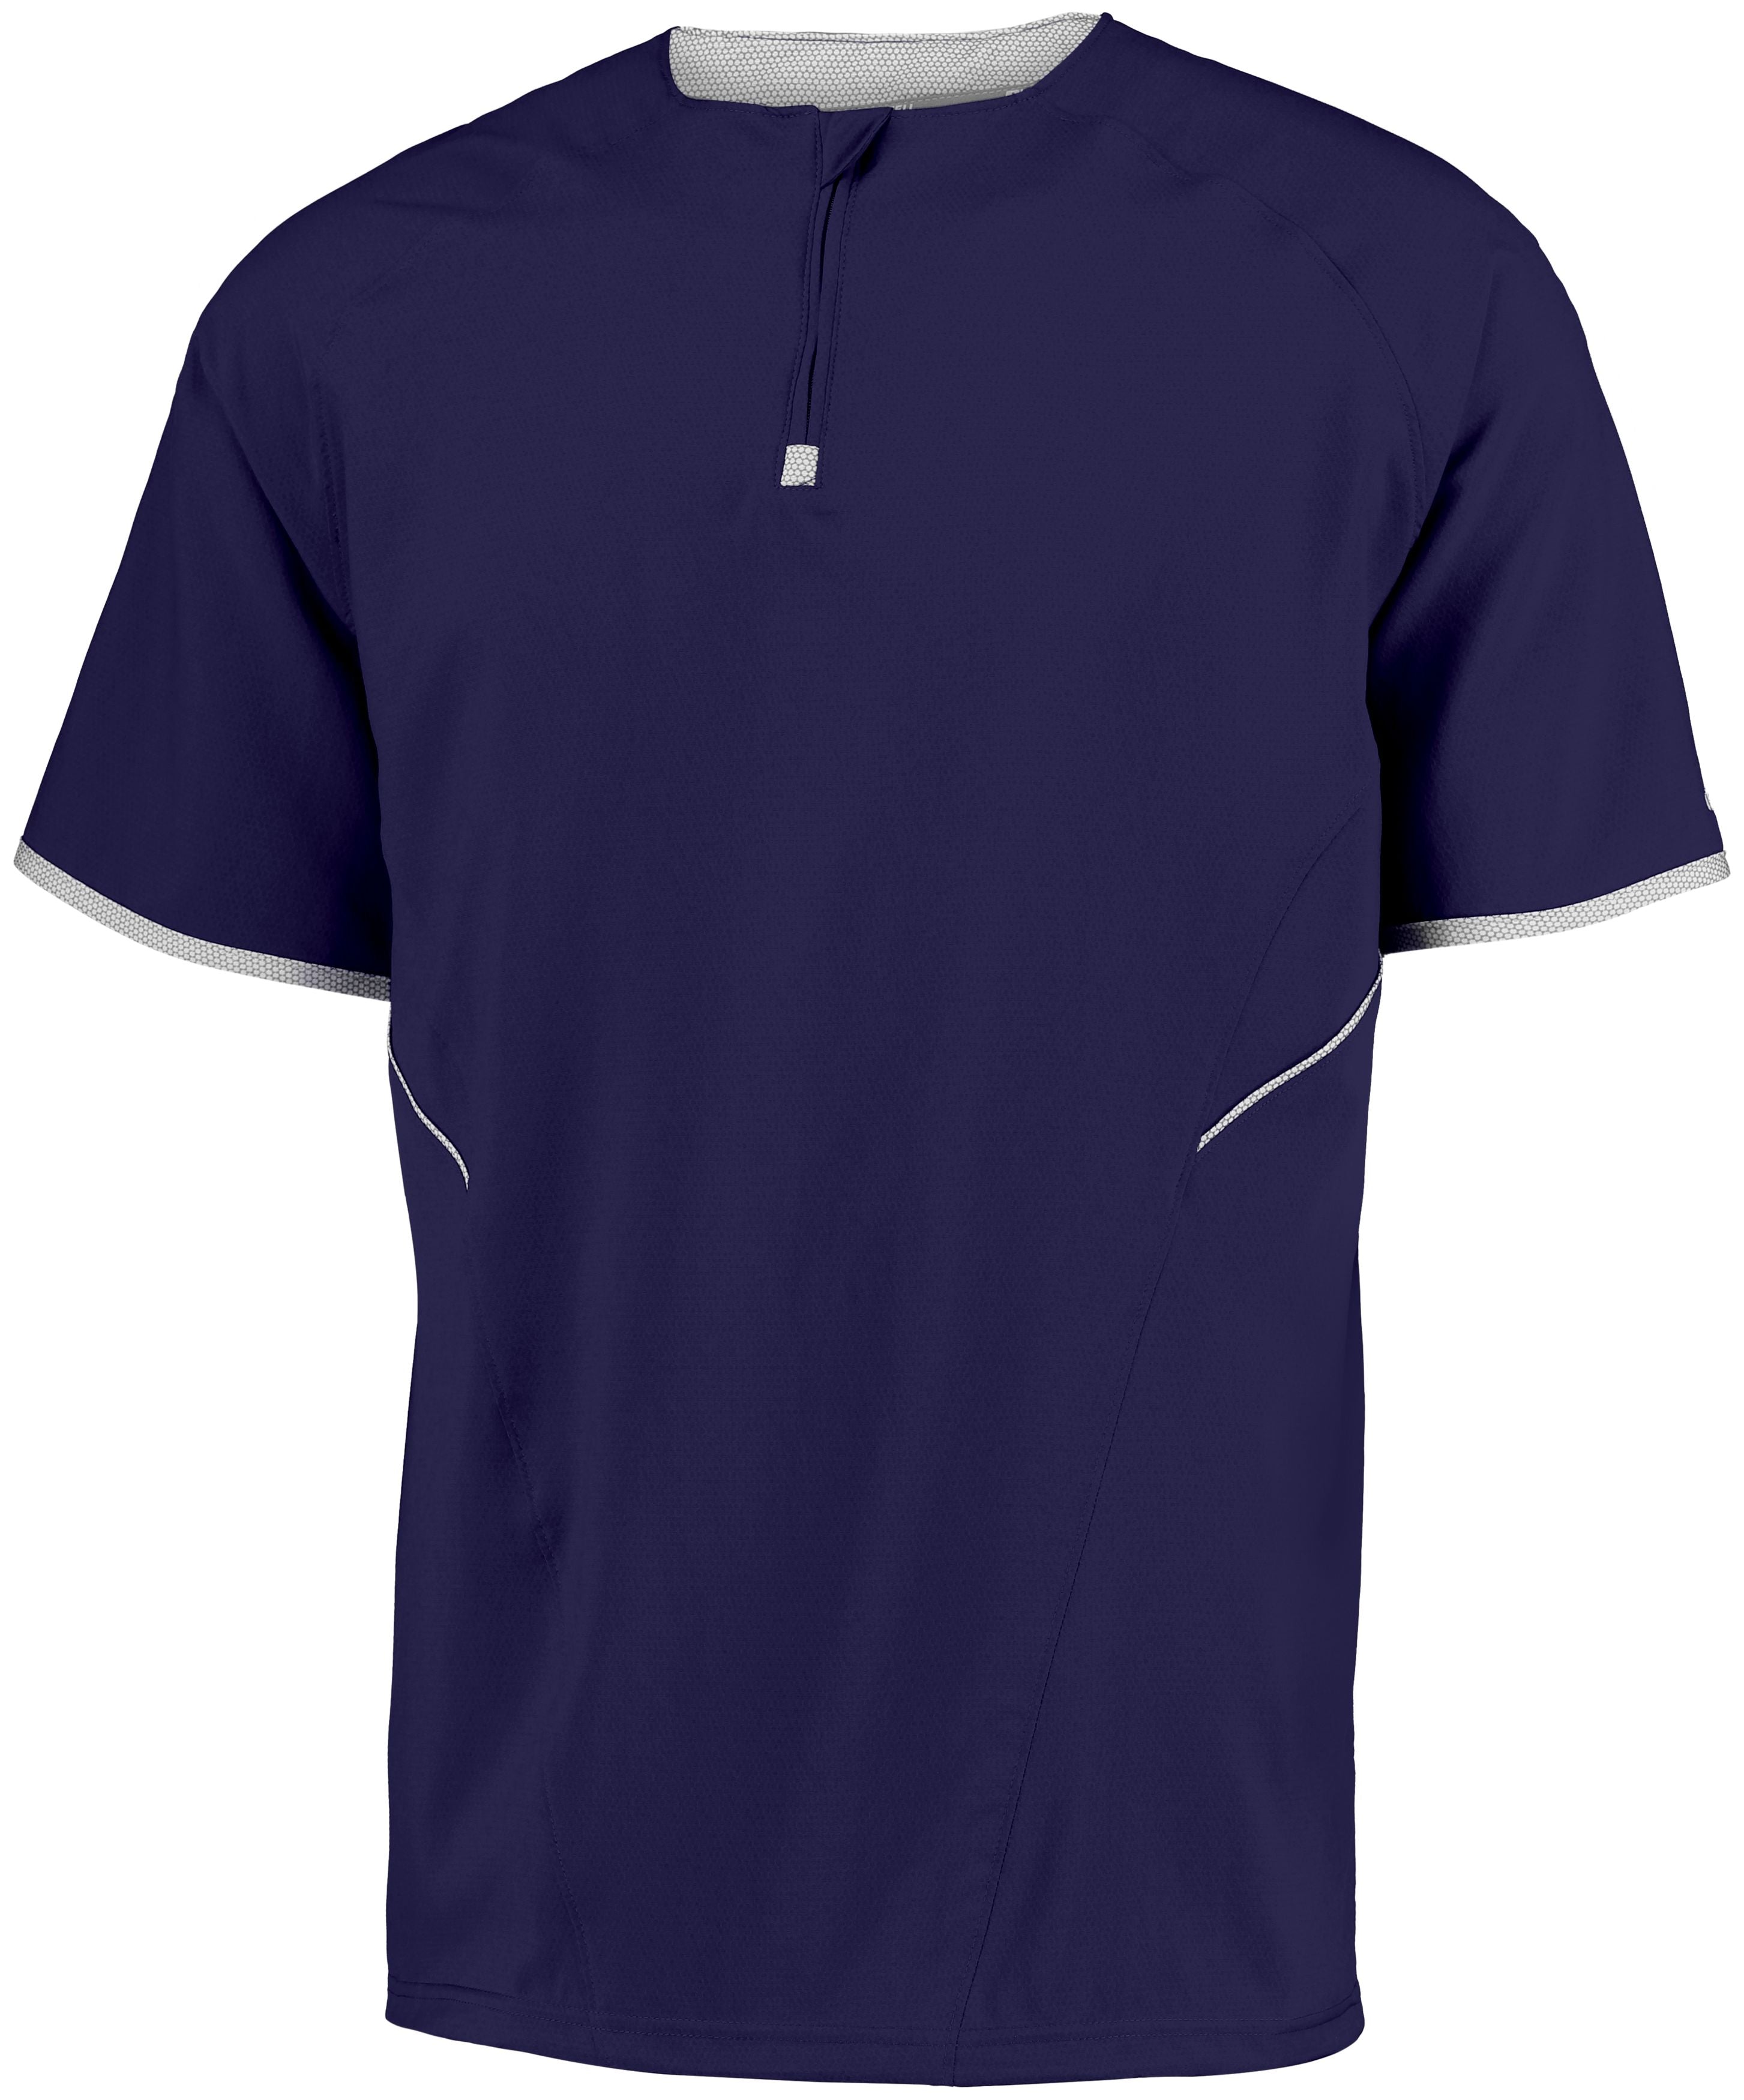 Russell Athletic Short Sleeve Pullover in Purple/White  -Part of the Adult, Baseball, Russell-Athletic-Products, Shirts, All-Sports, All-Sports-1 product lines at KanaleyCreations.com